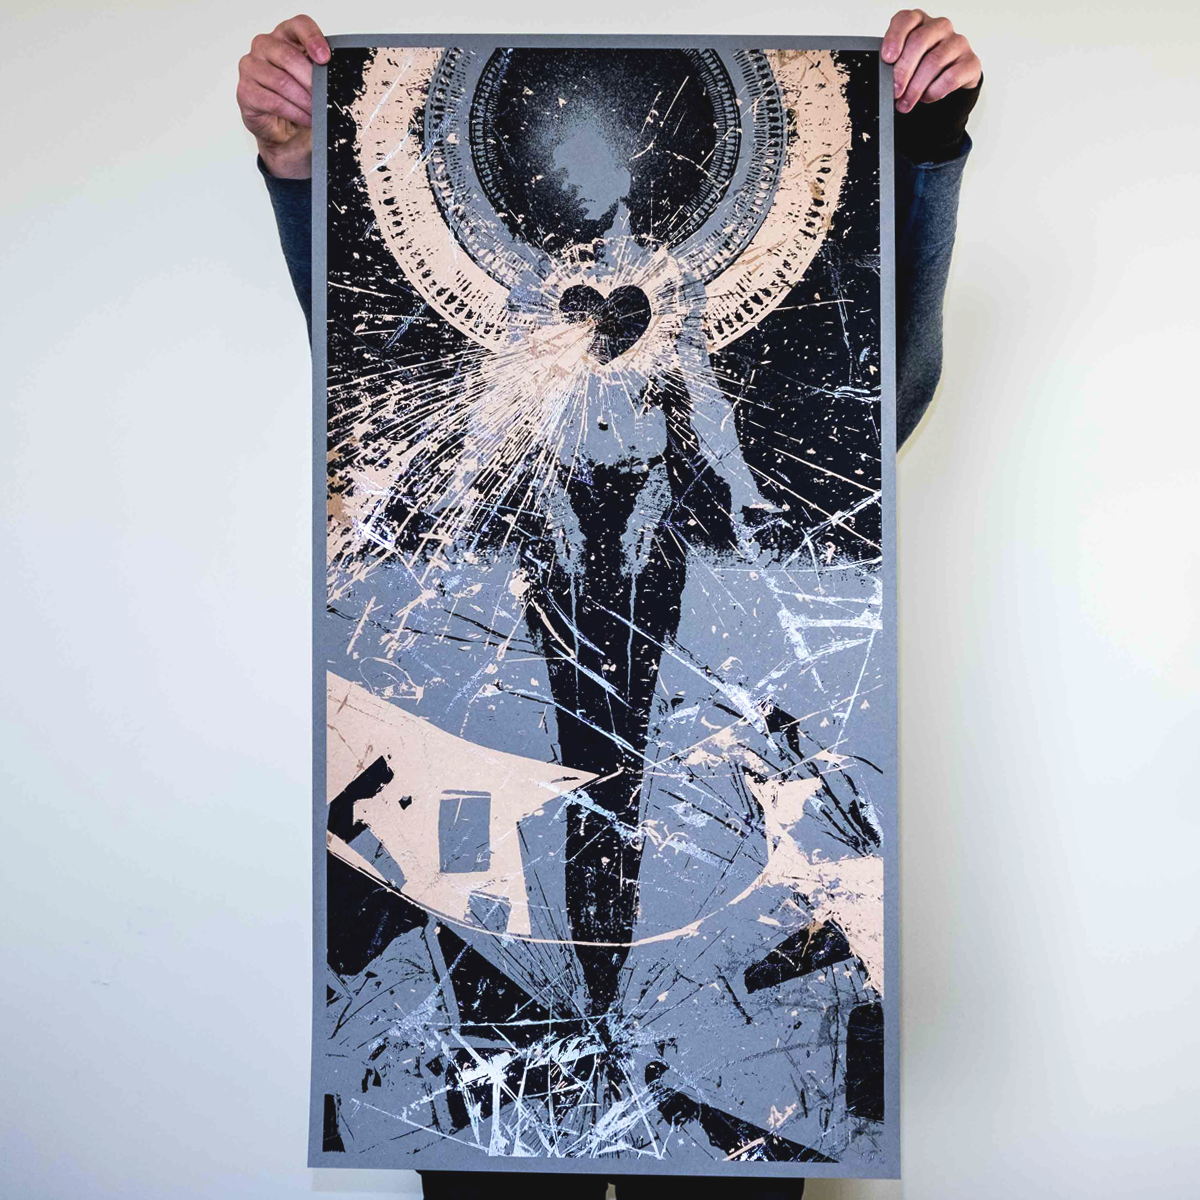 J. Bannon “In Place Apart: Steel Grey Edition” Silkscreened Print